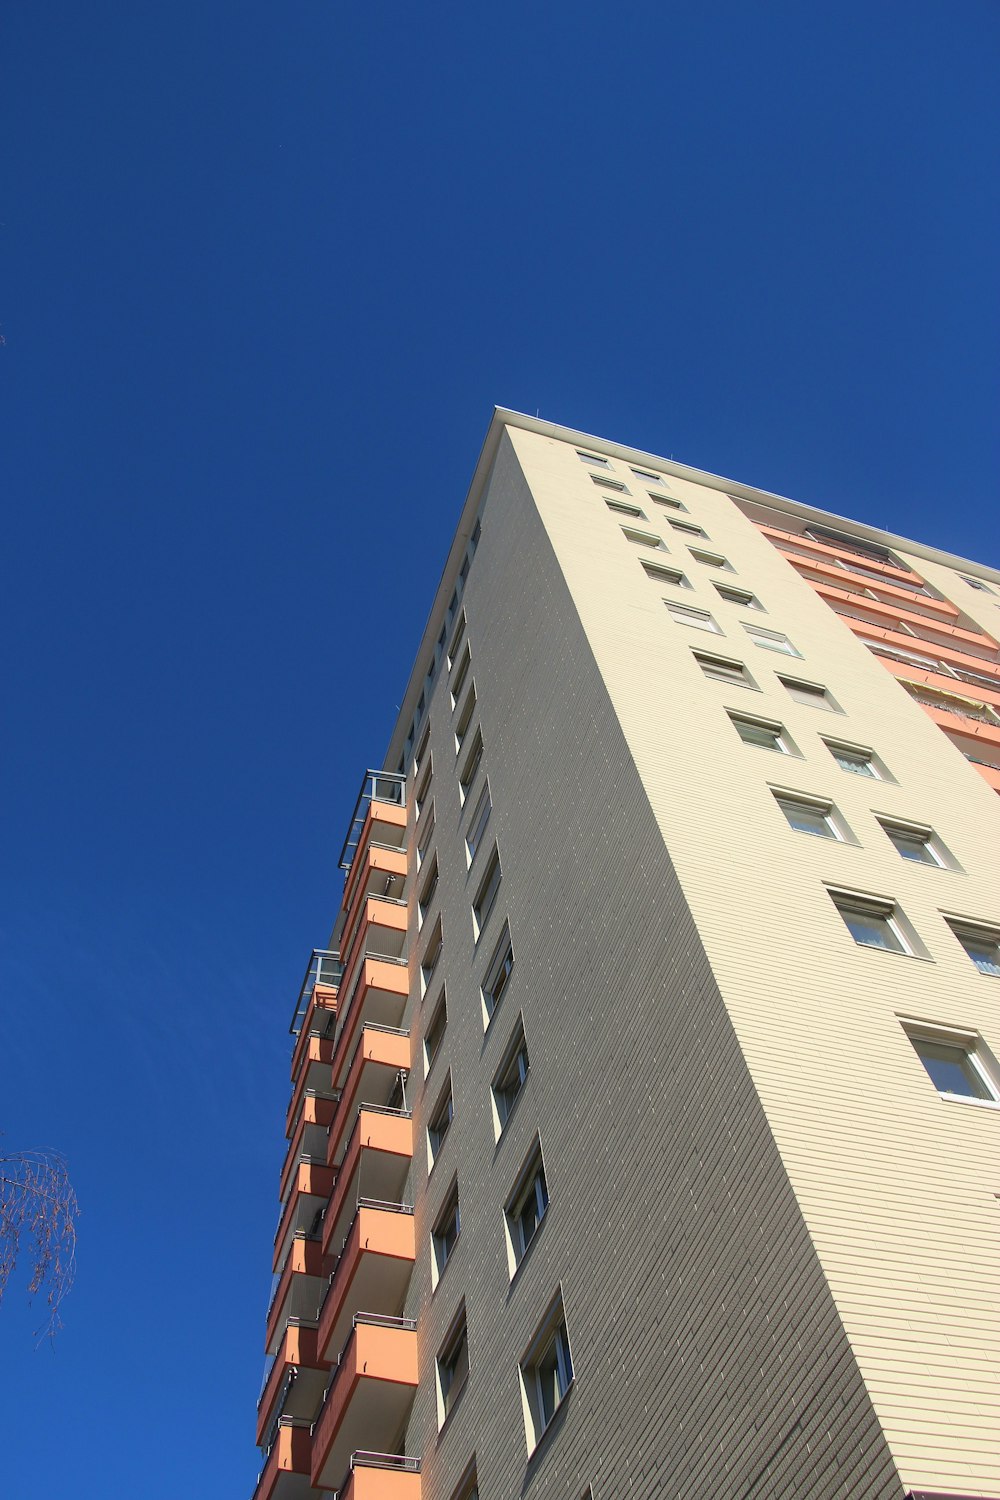 low angle view of high-rise building